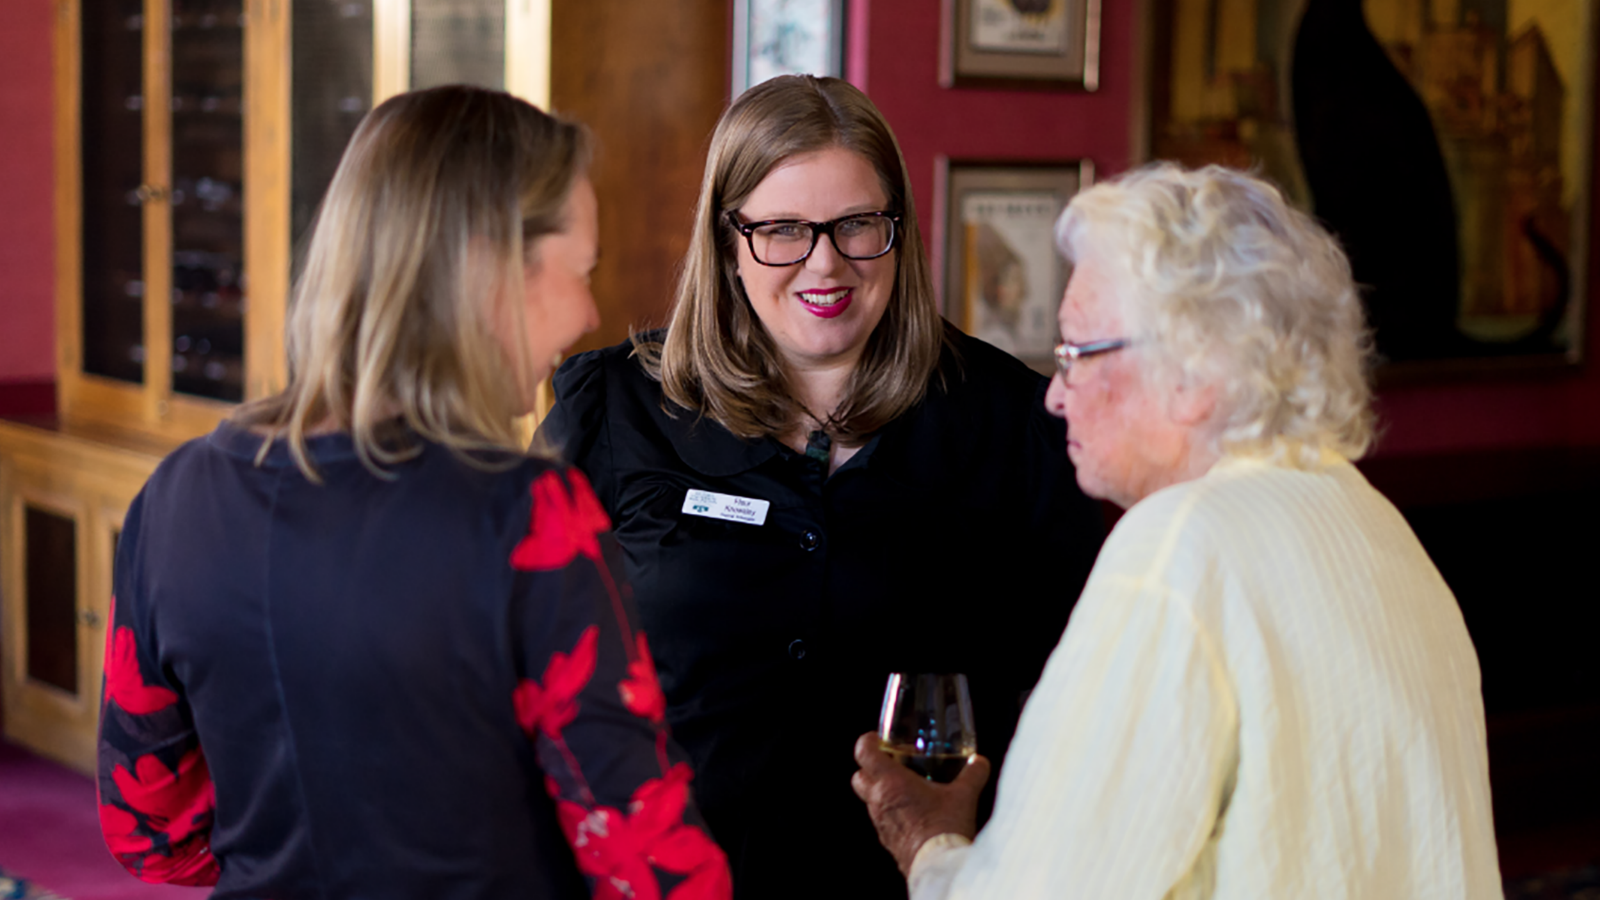 Regional amabassador Fleur Knowsley chats with two attendees at an alumni event in San Francisco.